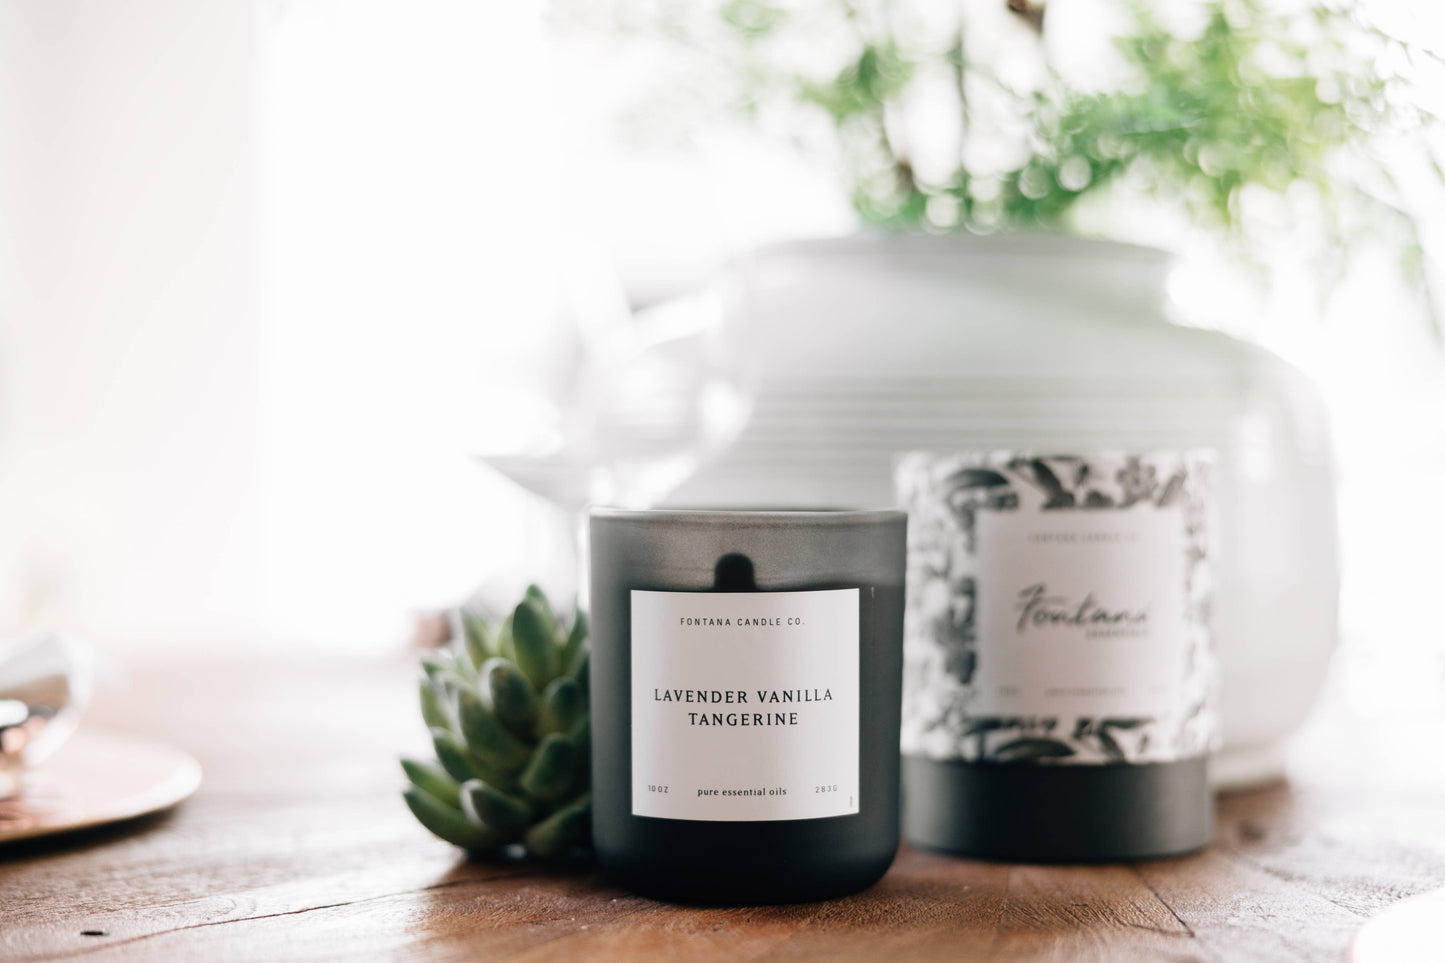 The Luxe Beeswax Essential Oil Natural Candle Collection: Lemongrass Eucalyptus